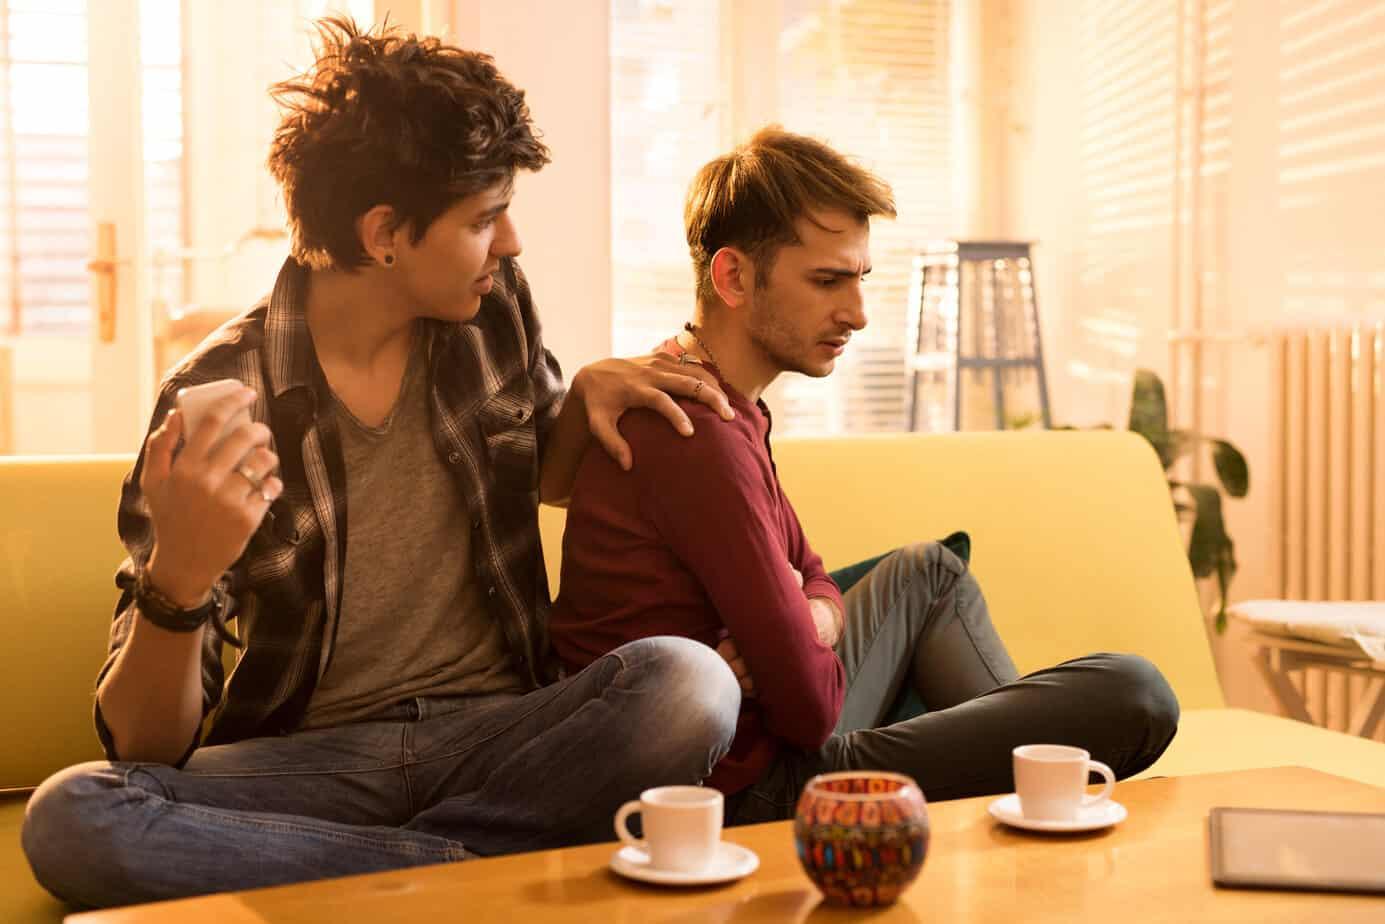 gay couple seated on couch, one partner comforts other partner who looks upset